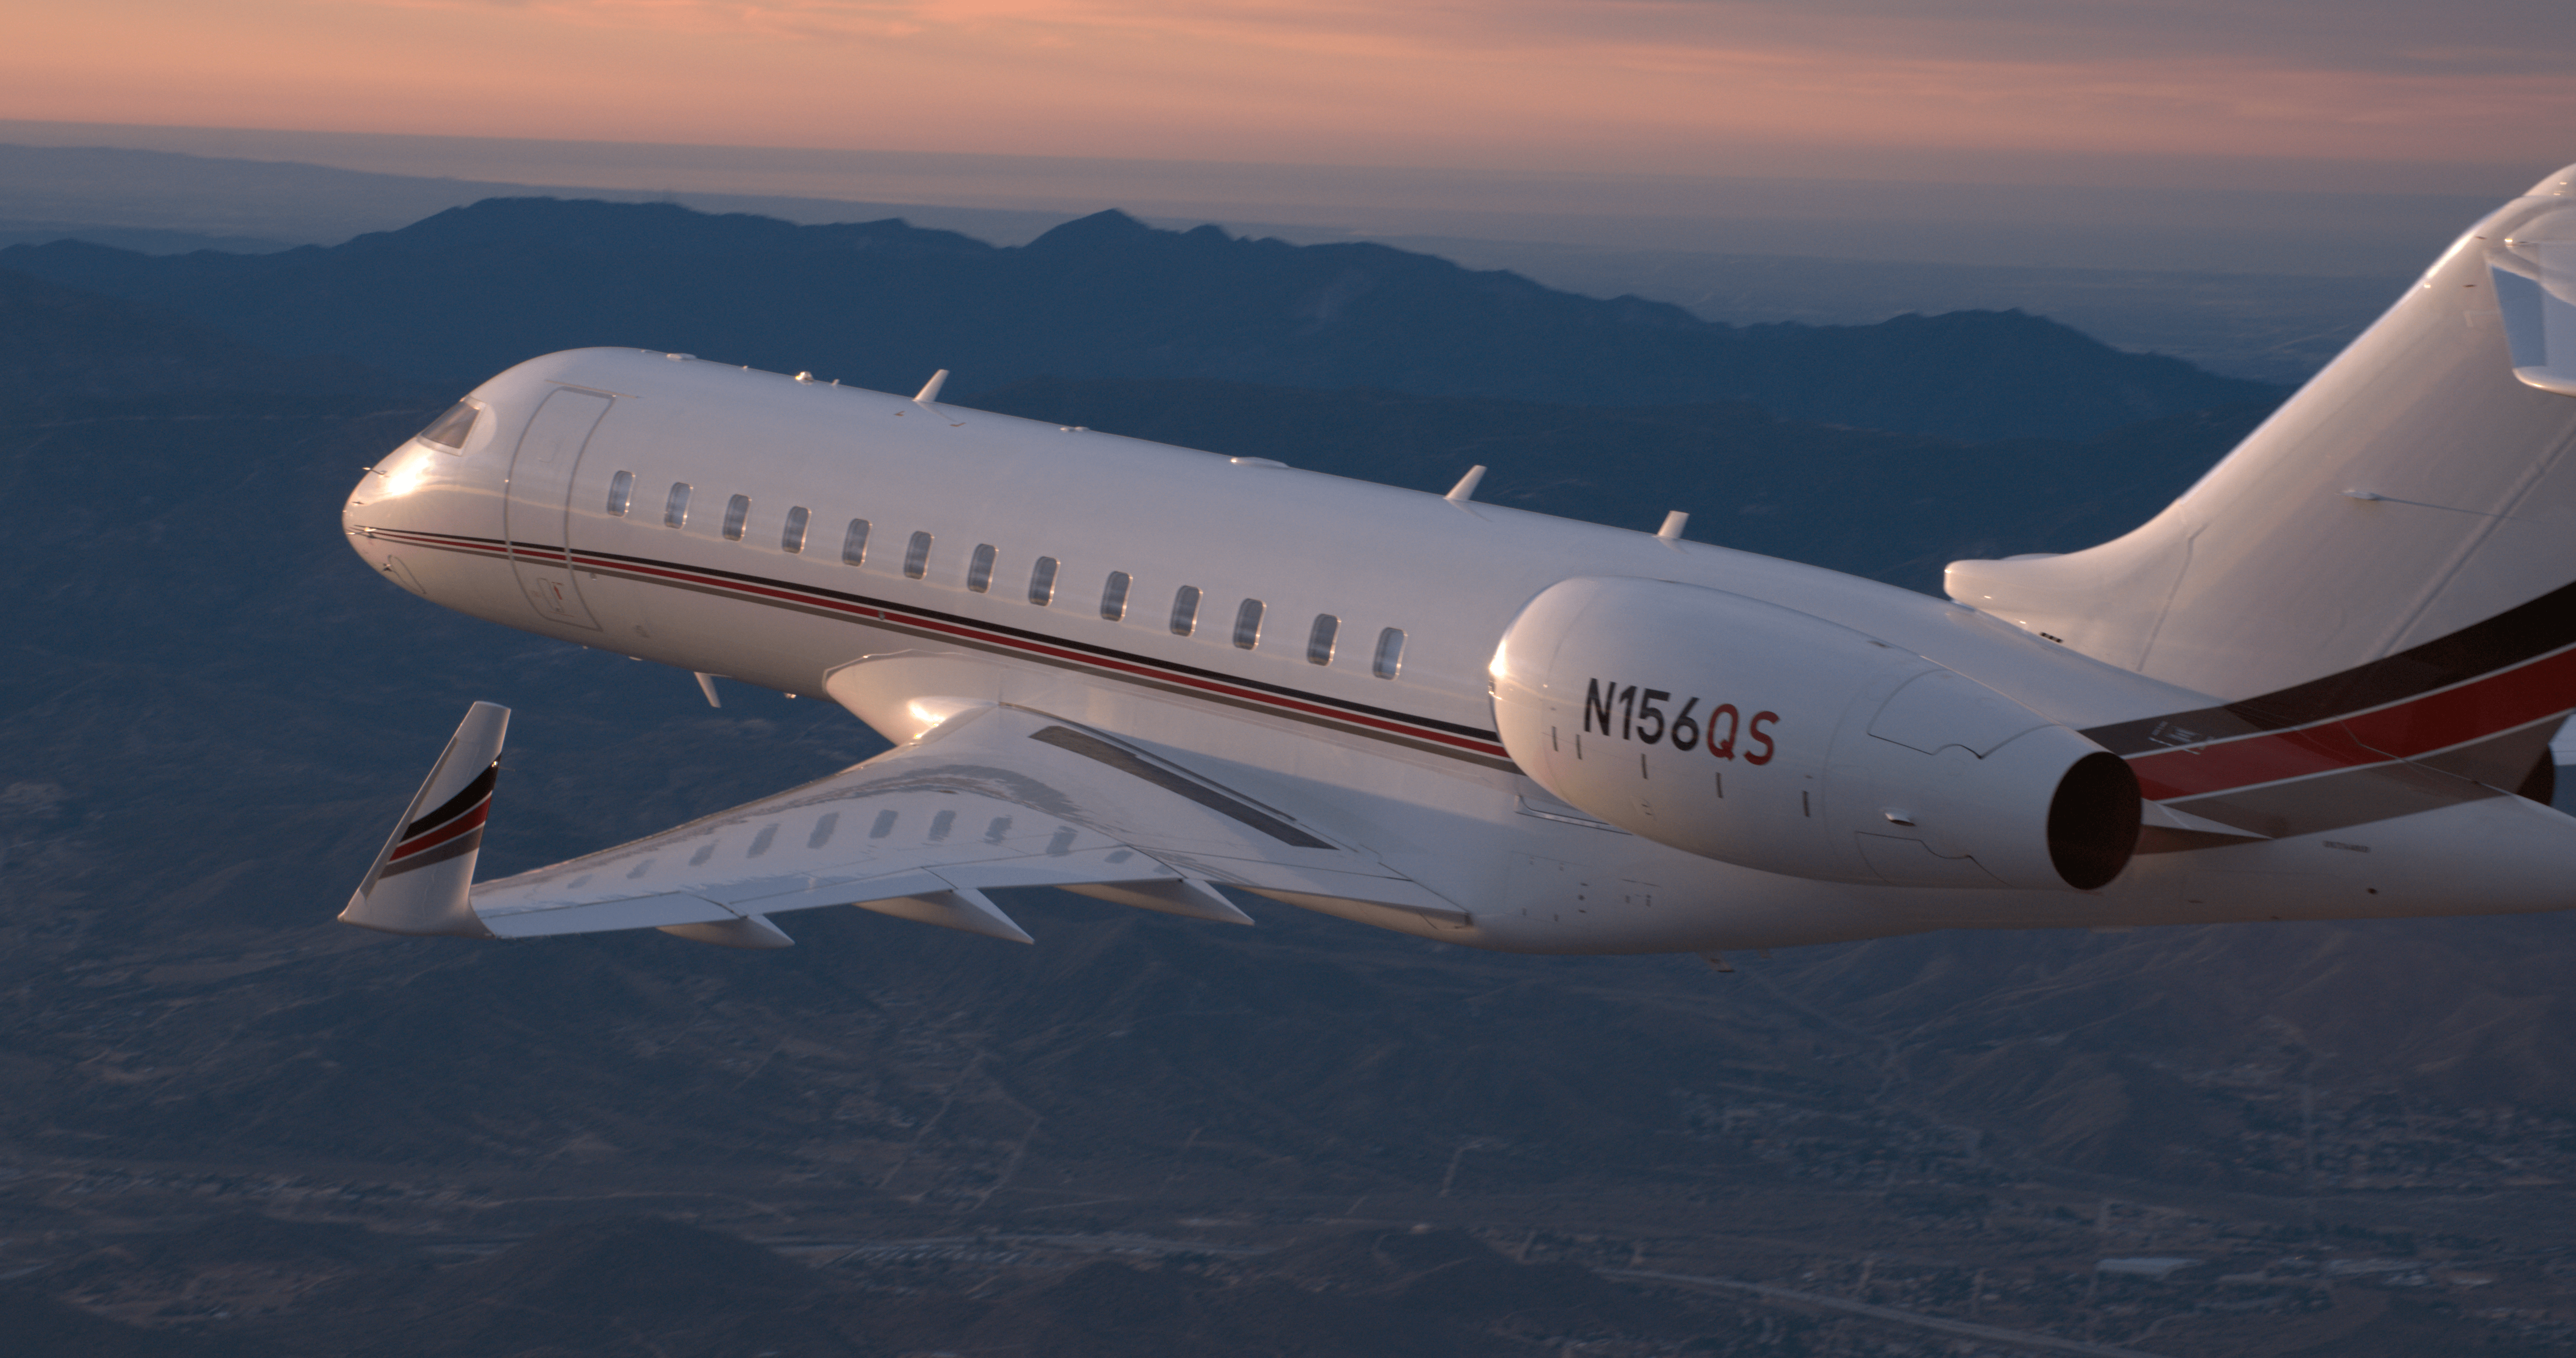 netjets plane in the air